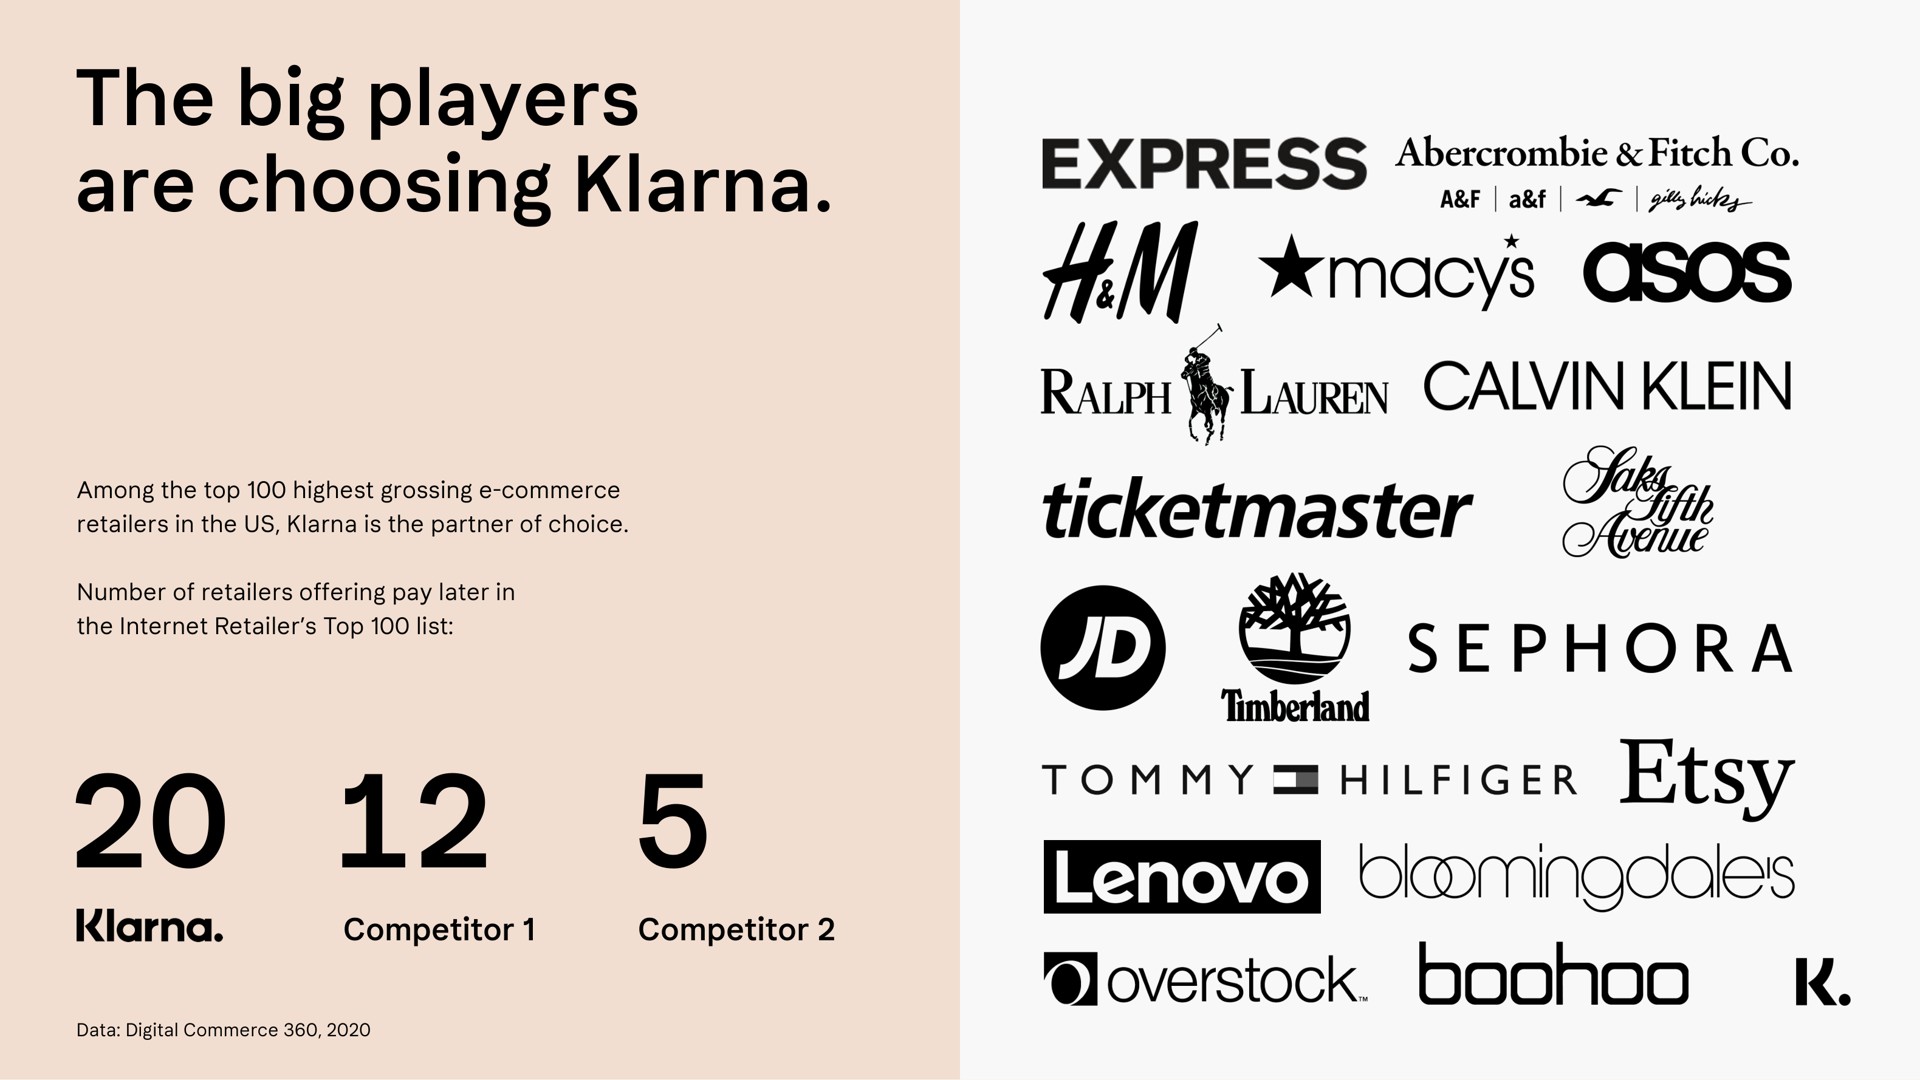 the big players are choosing express fitch raven my tommy overstock boohoo | Klarna